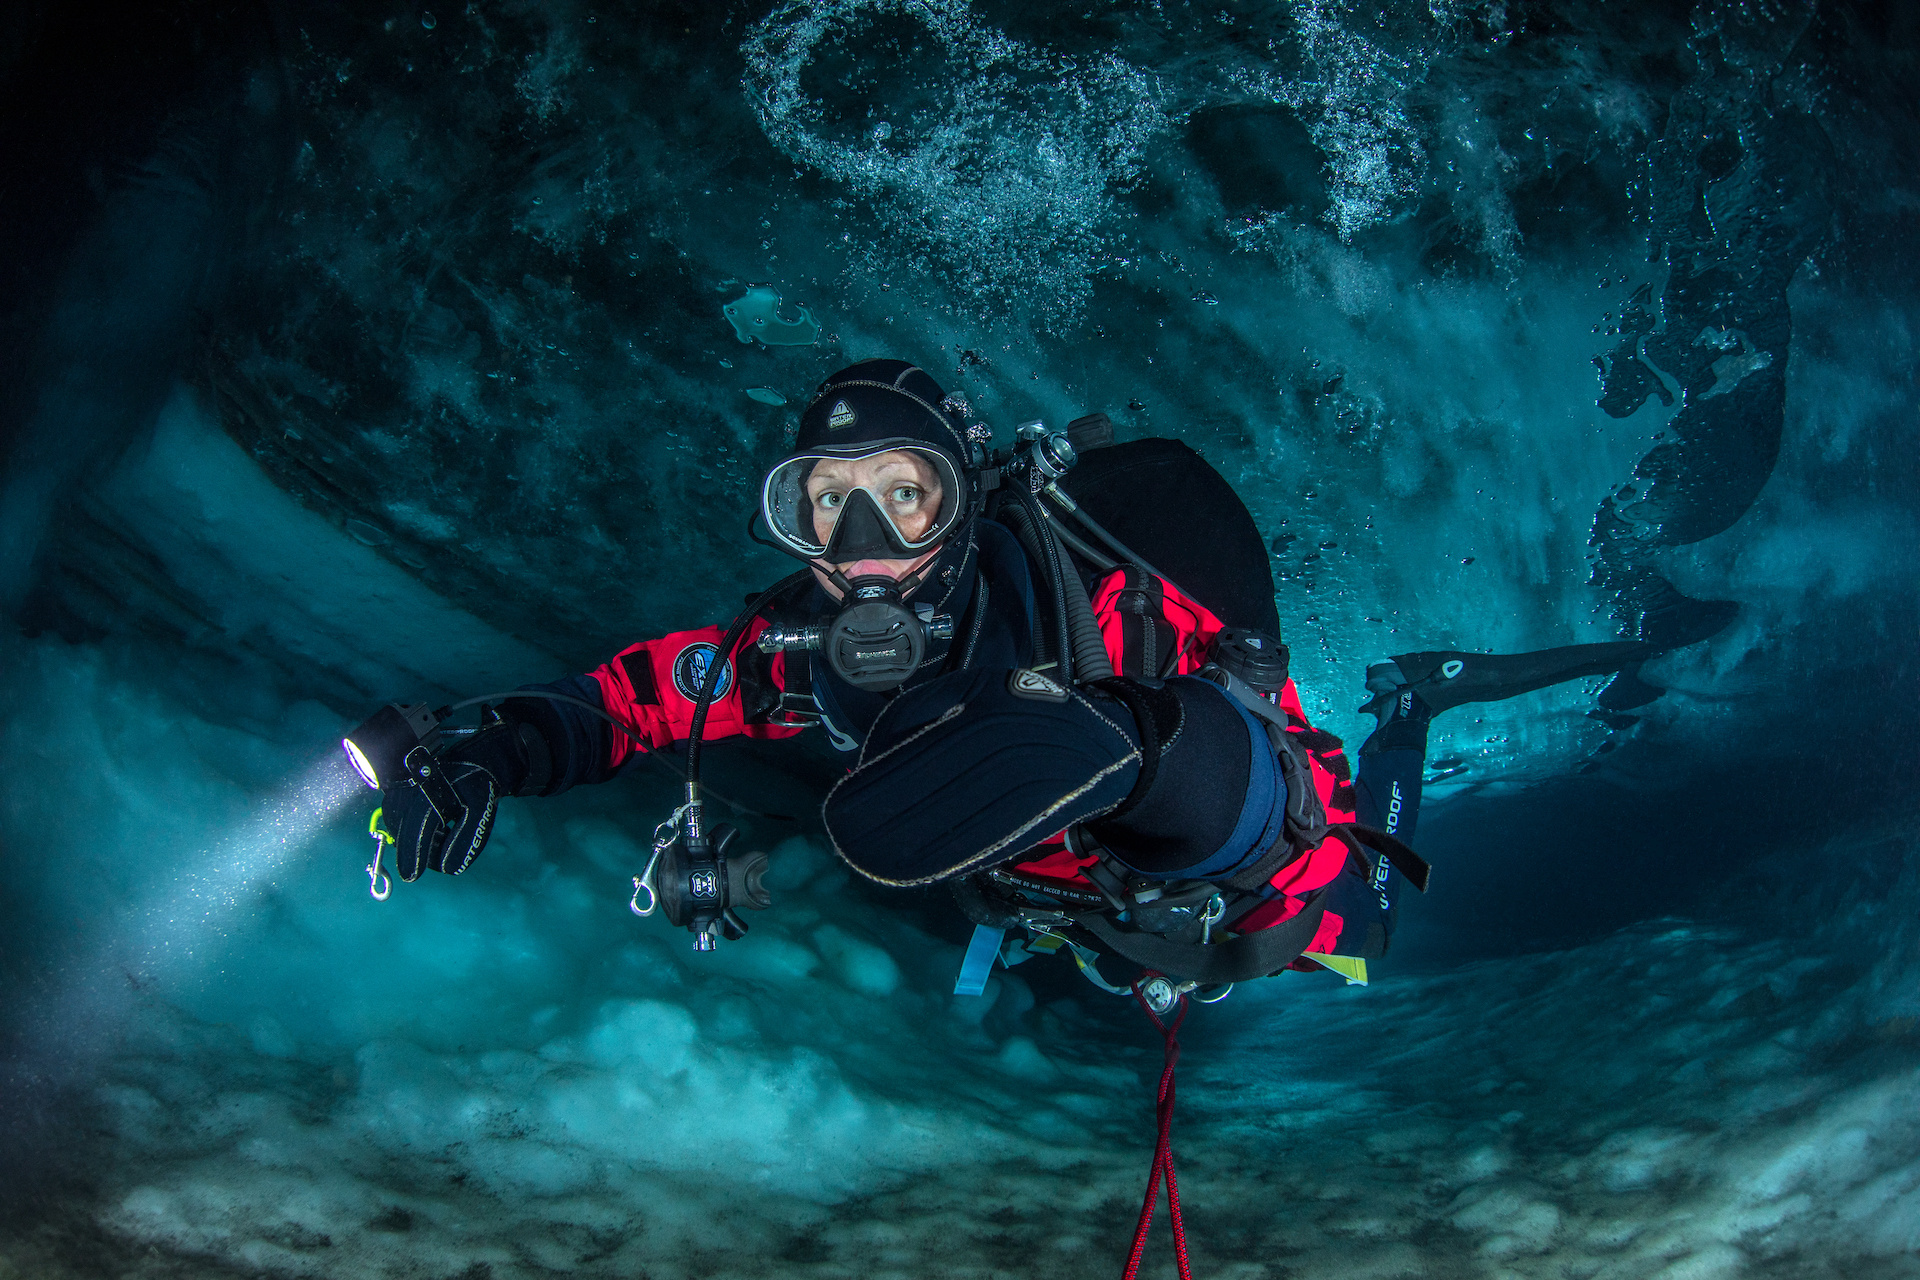 Scuba Diving: Swimming underneath glaciers in flooded ice caves, An extremely dangerous water sport. 1920x1280 HD Background.